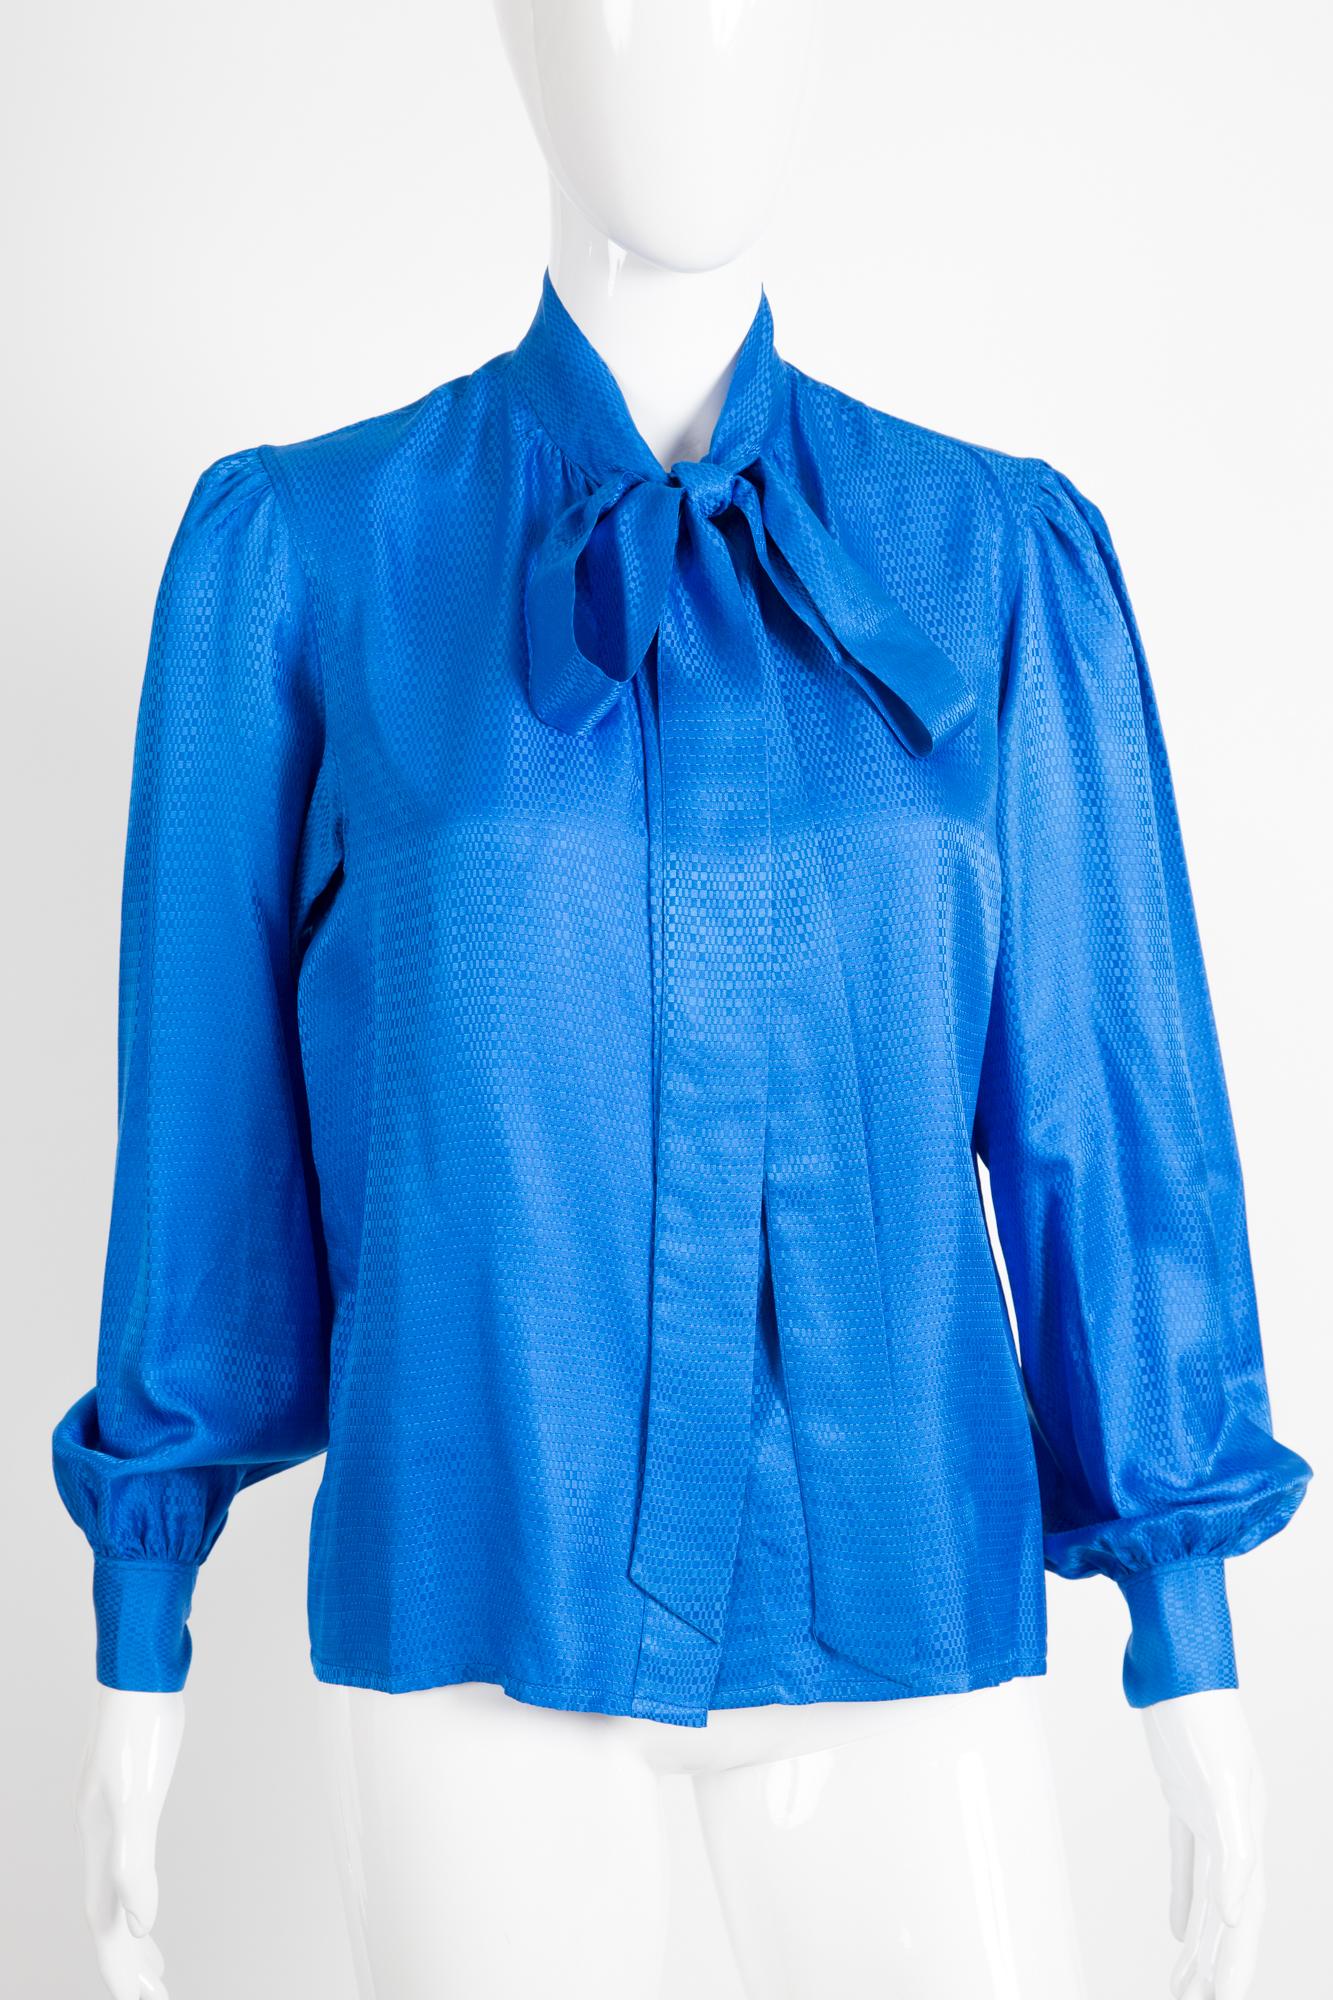  Yves Saint Laurent blue silk shirt featuring a bow tie, front buttons, a textured jacquard silk. front button opening under placket, long sleeves. 
100% Silk
In excellent vintage condition. Made in France. 
Estimated size 38fr/US6 /UK10
We